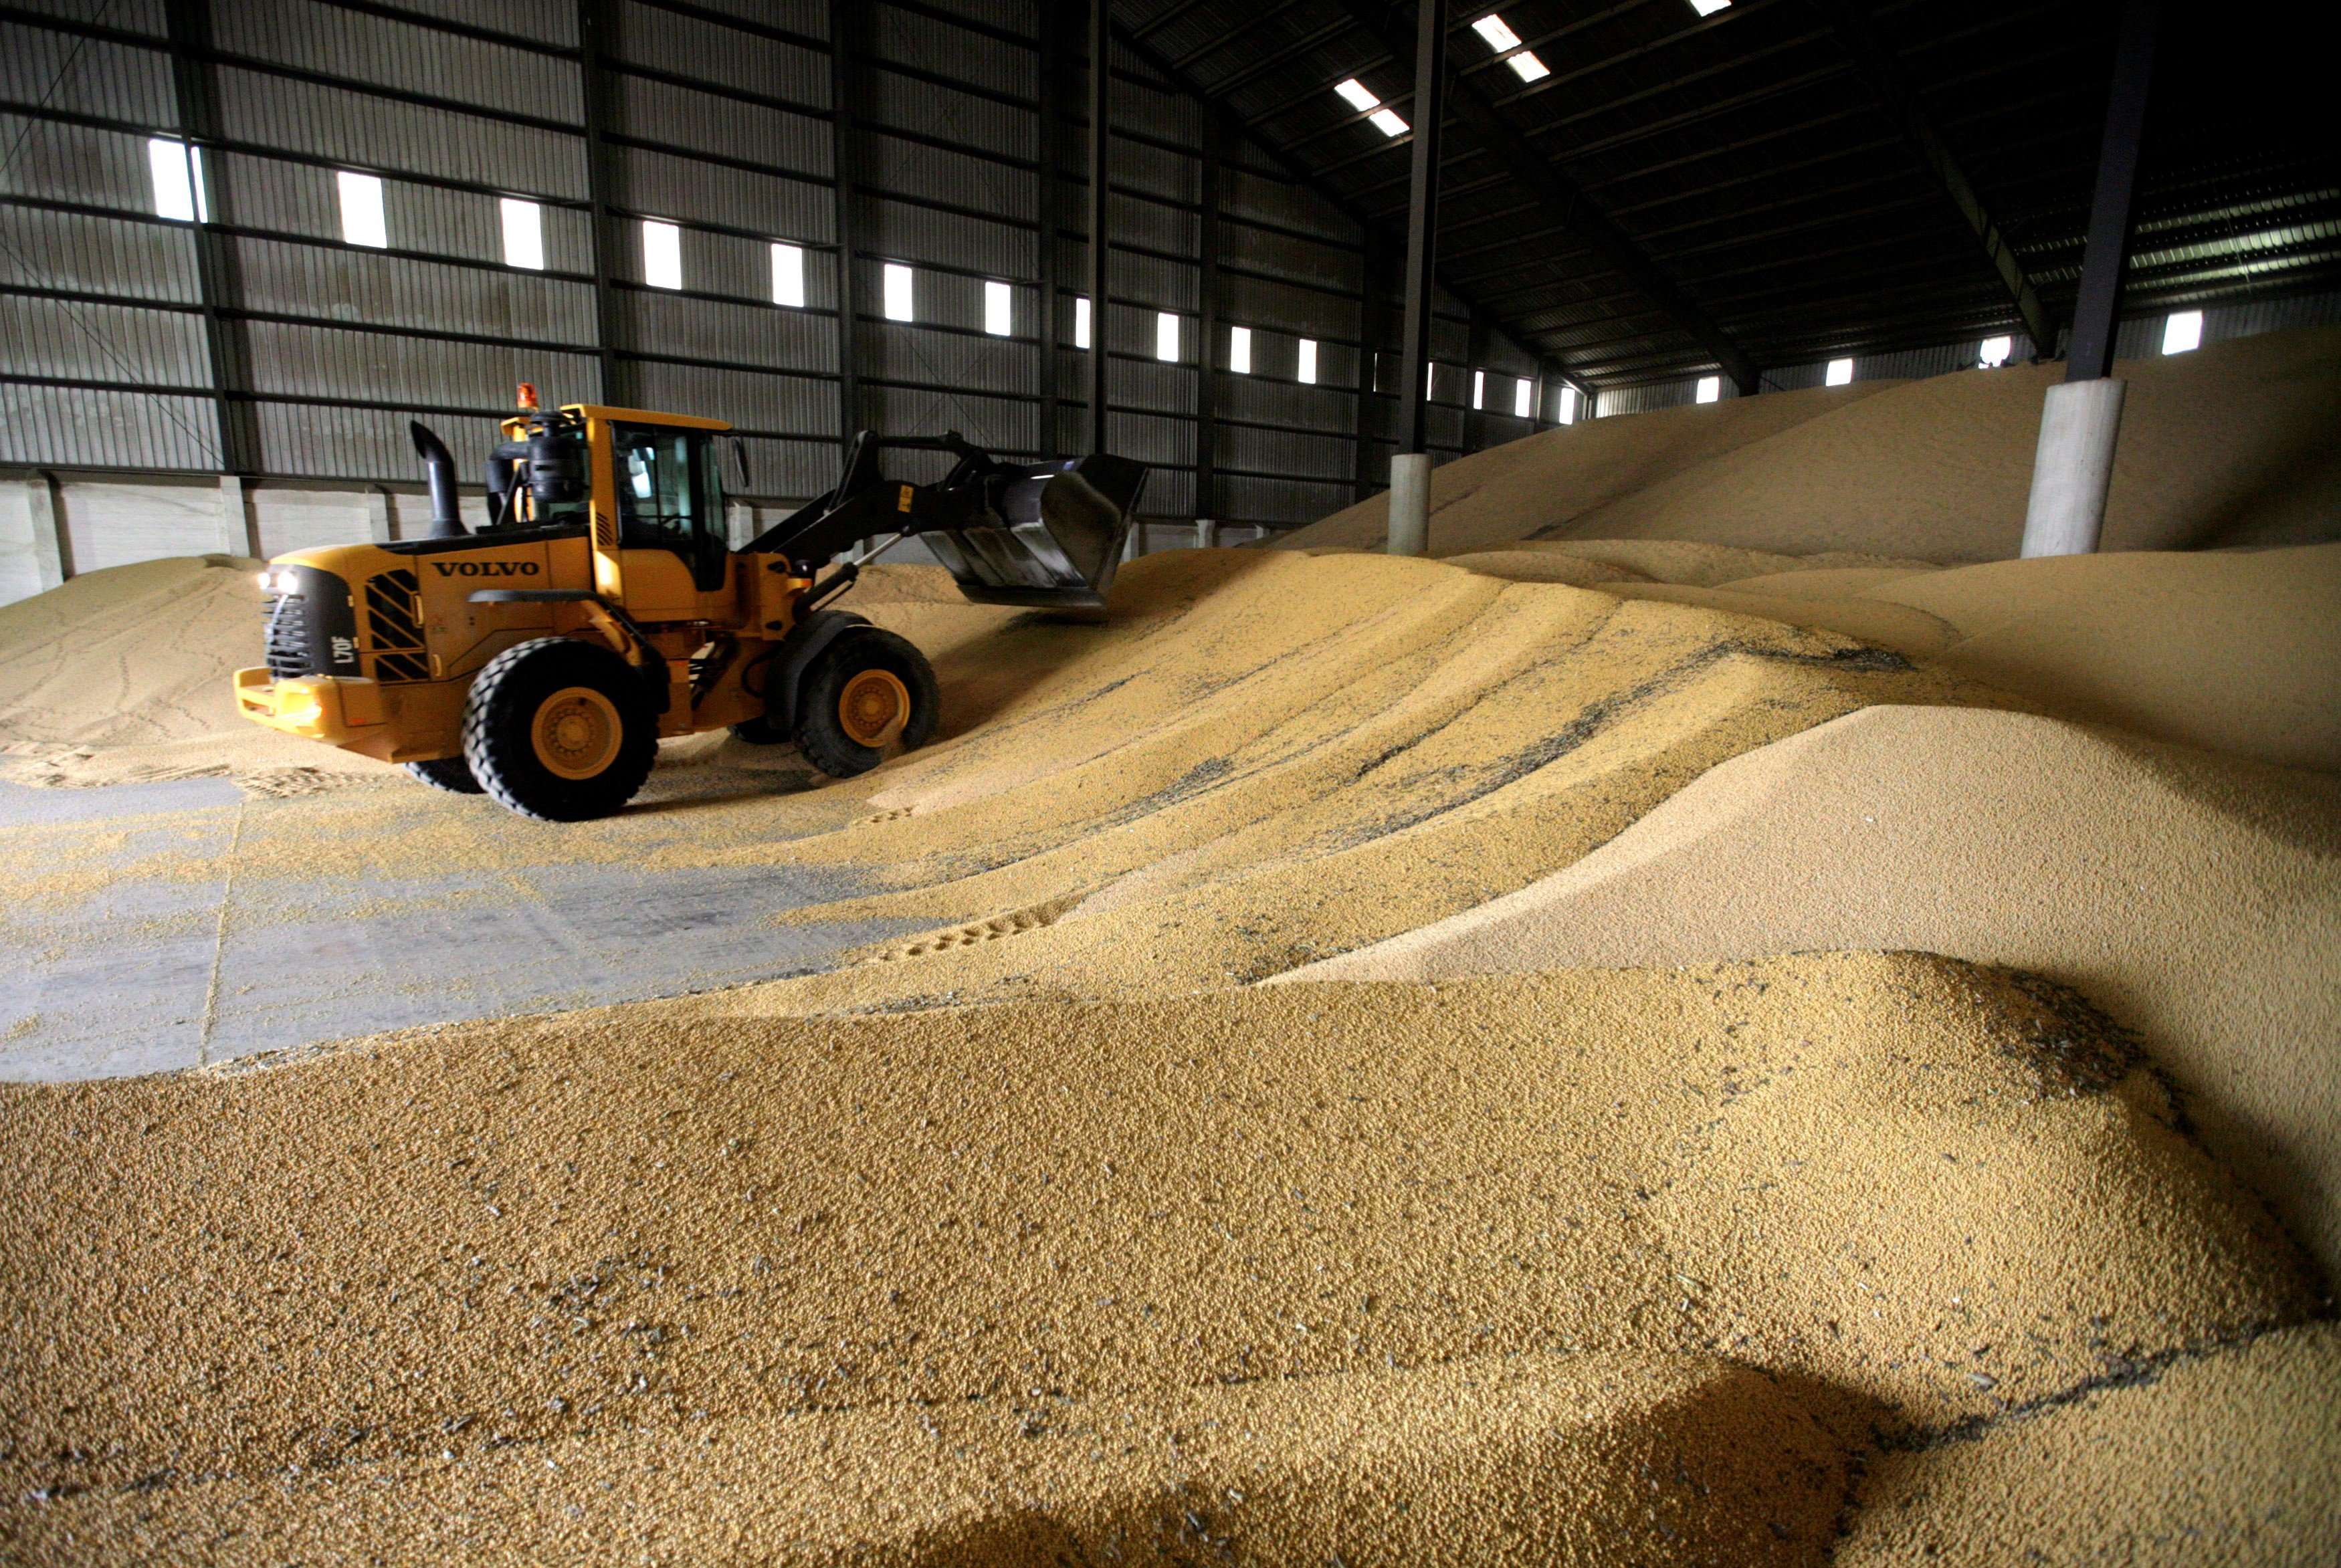 Soybean is the top agriculture commodity China imports from the US. Photo: Reuters